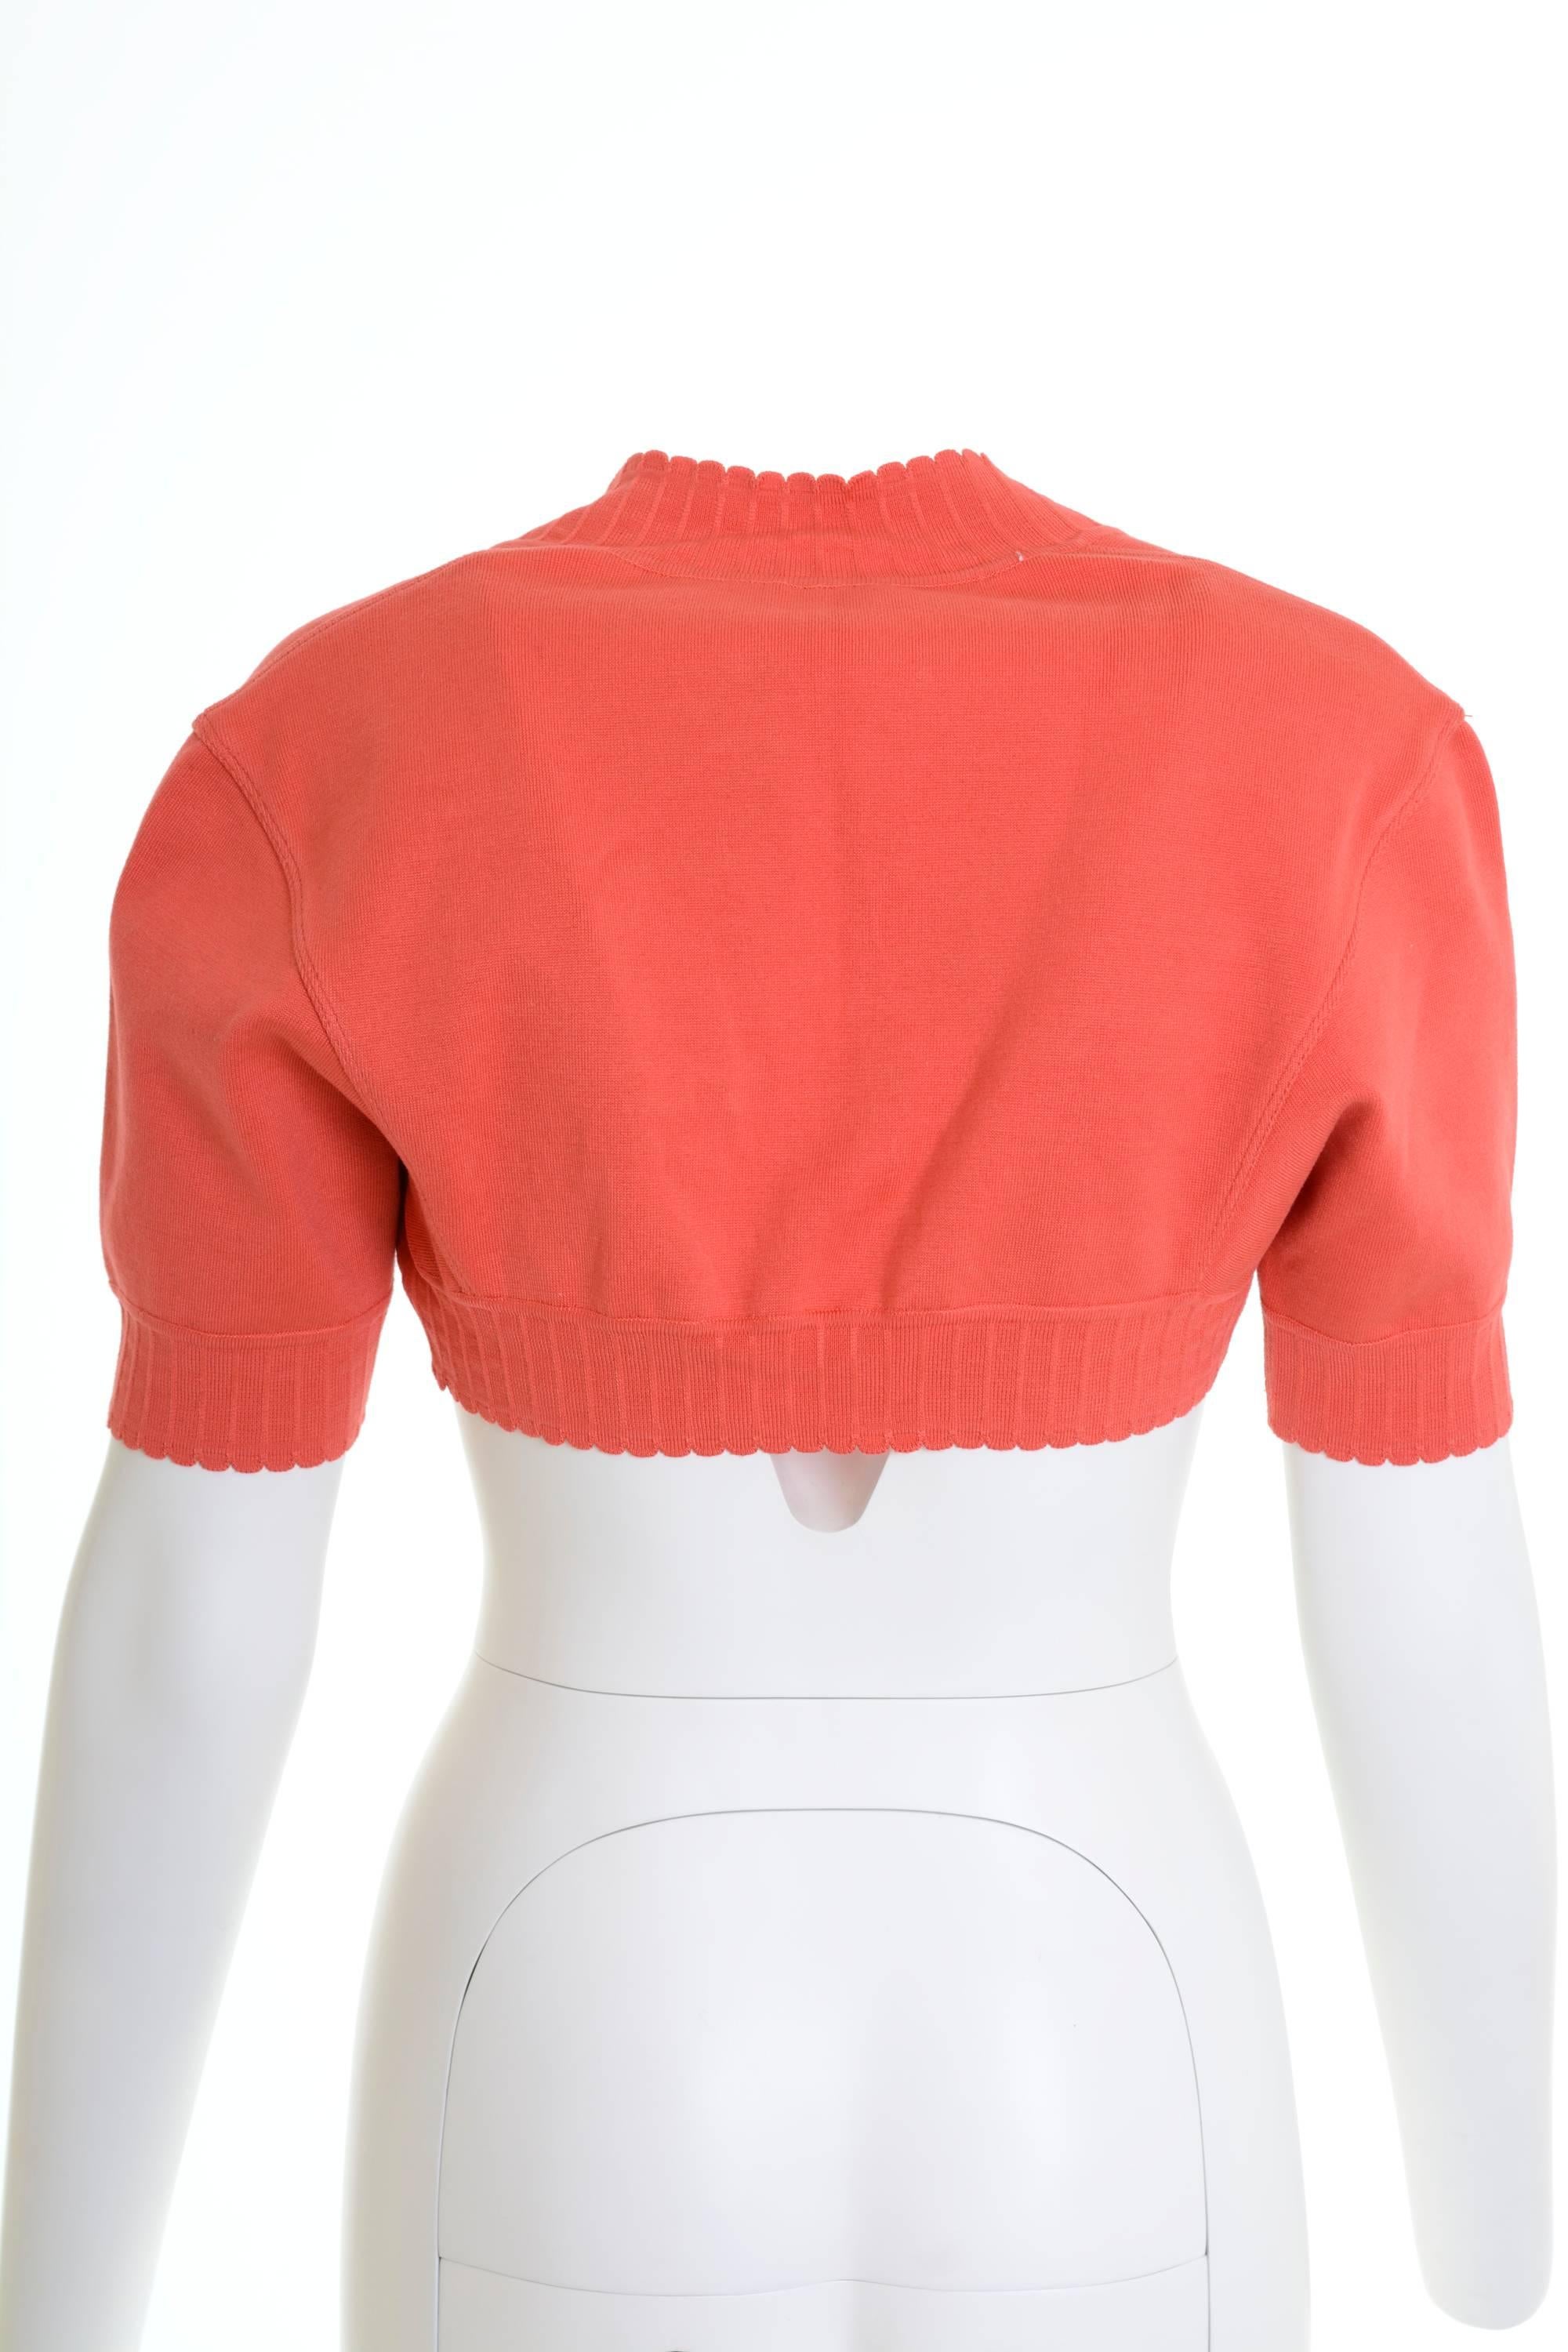 1990s Azzedine Alaïa bolero in a peach stretch fabric. 

Very good vintage condition

Label: Alaïa-Paris (Made in Italy)
Fabric: viscose / polyamide
Color: peach 

Measurement:
Label size M
Shoulders 15.75 inches / 40 cm
Sleeves 9 inches / 22